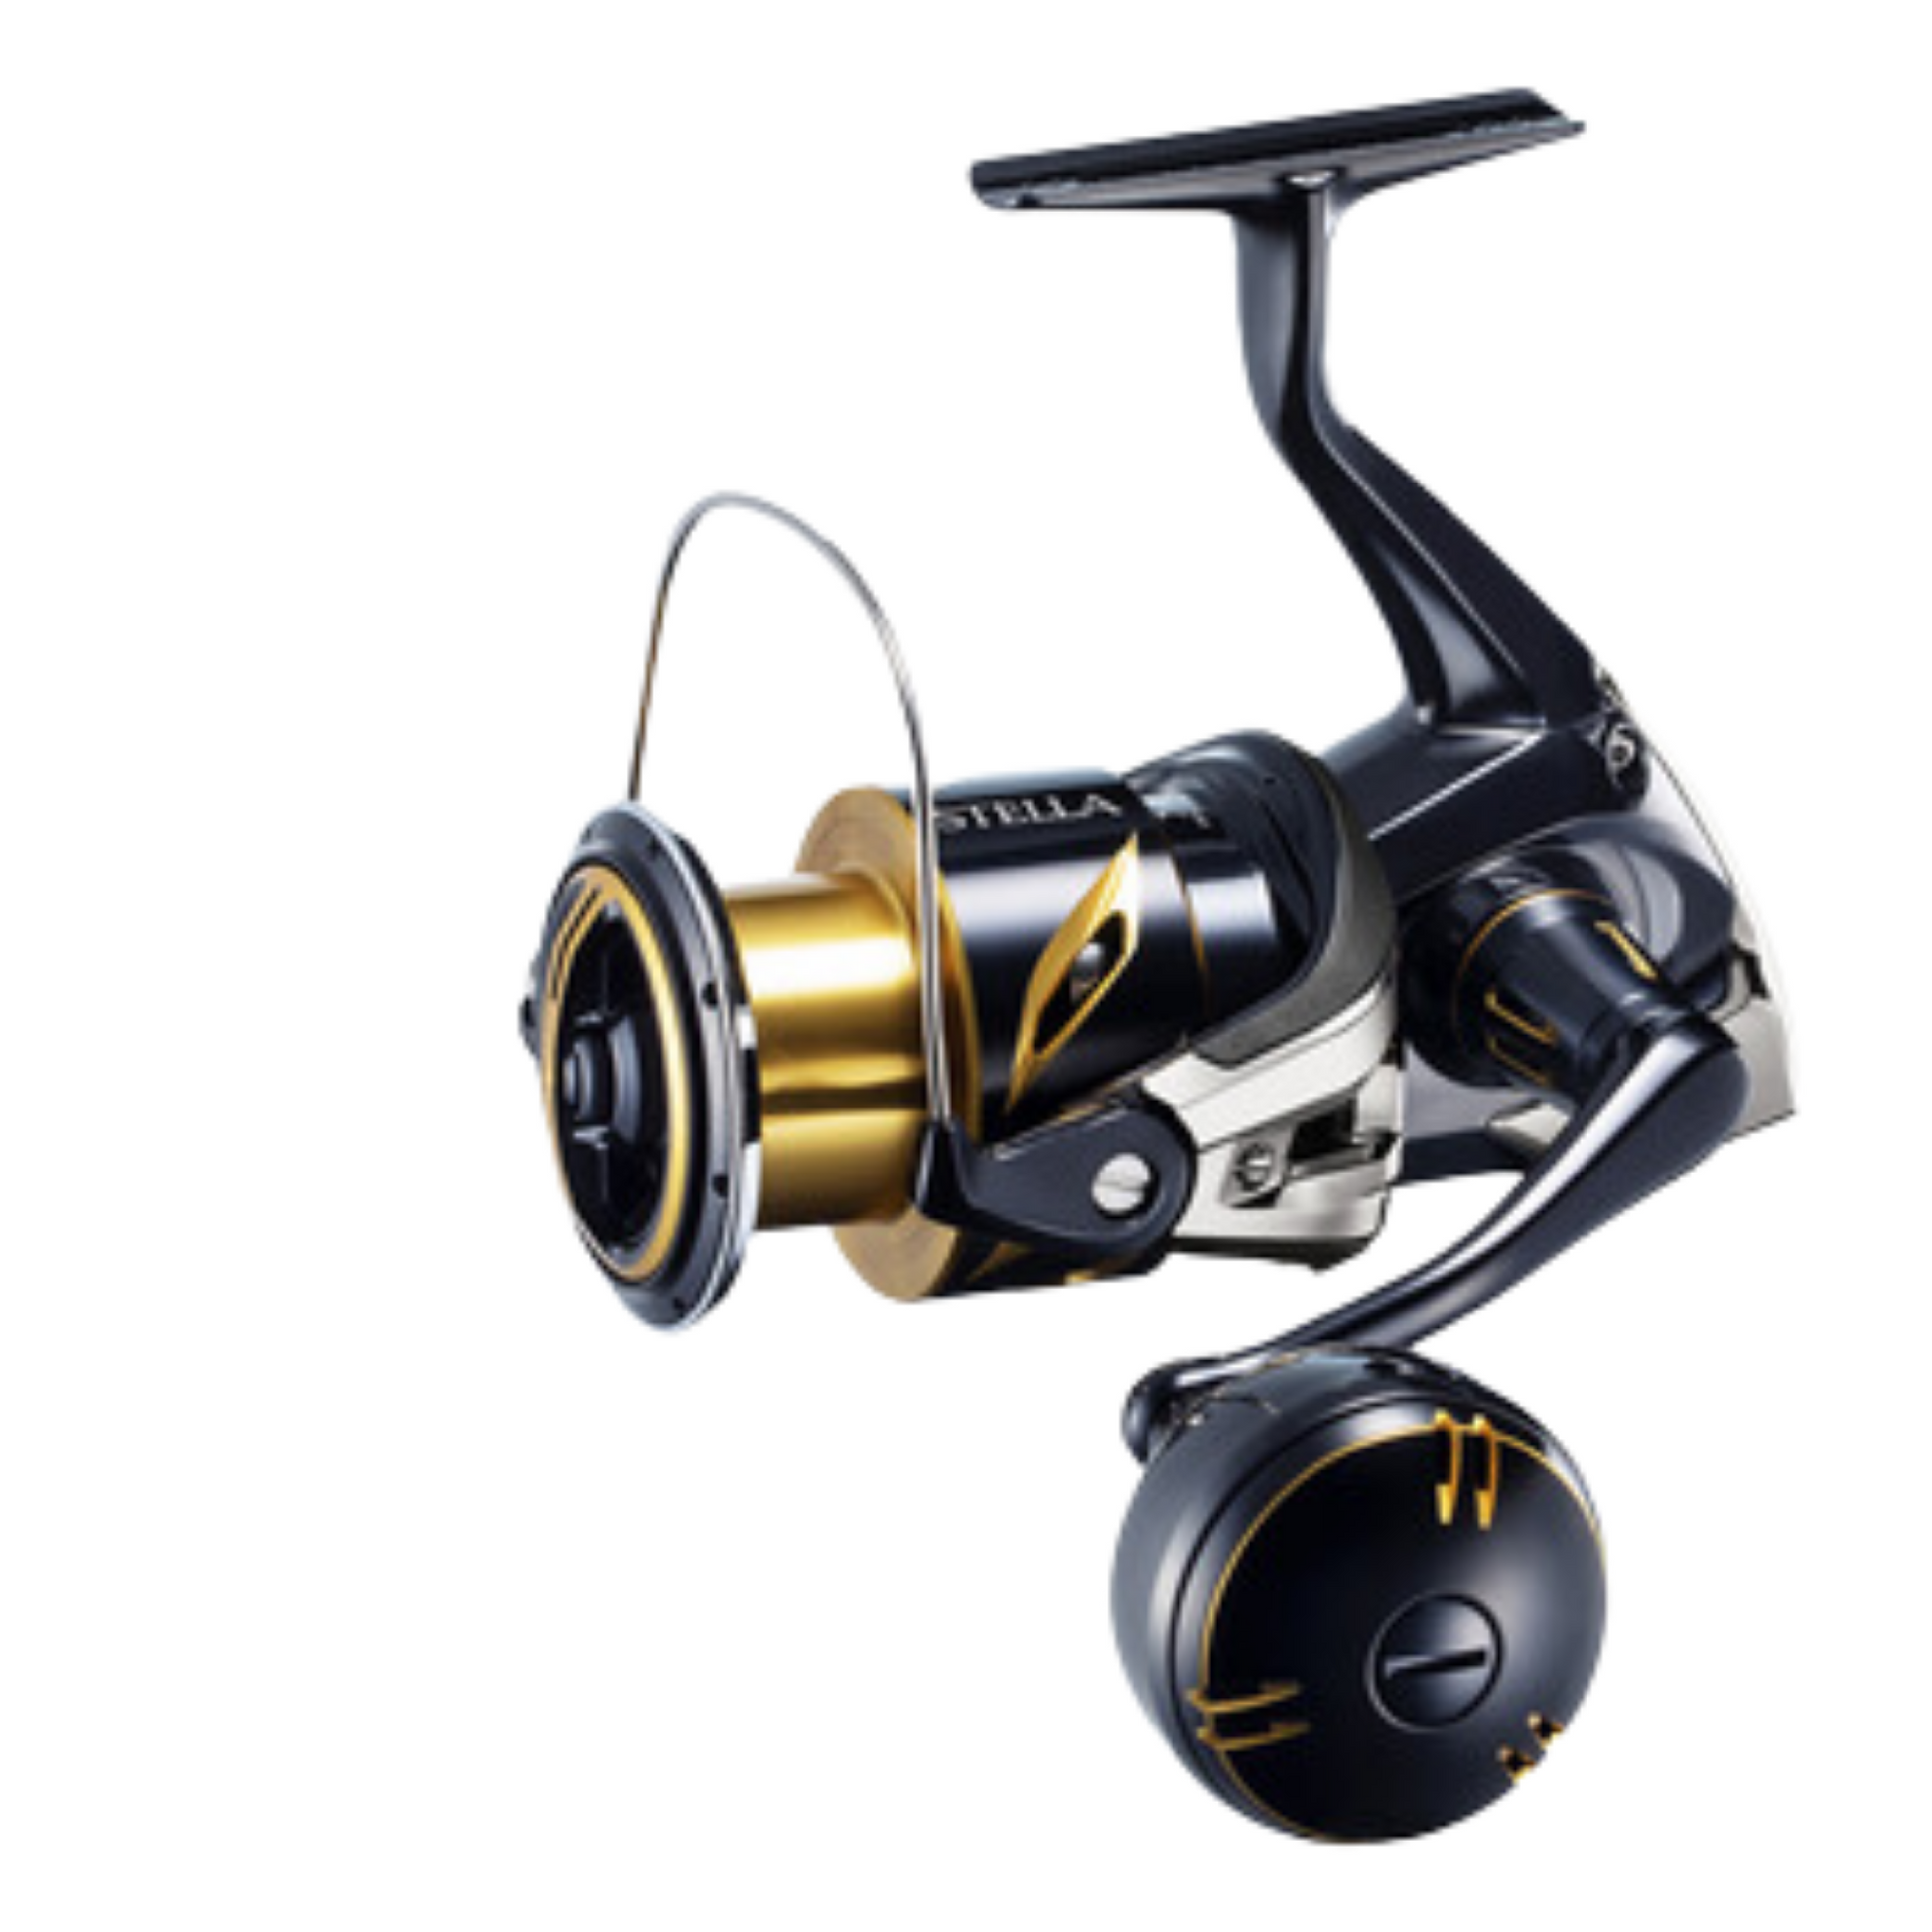 Popular Size Stella SW Spinning Reels Continue Shimano's Techology  Advancements »